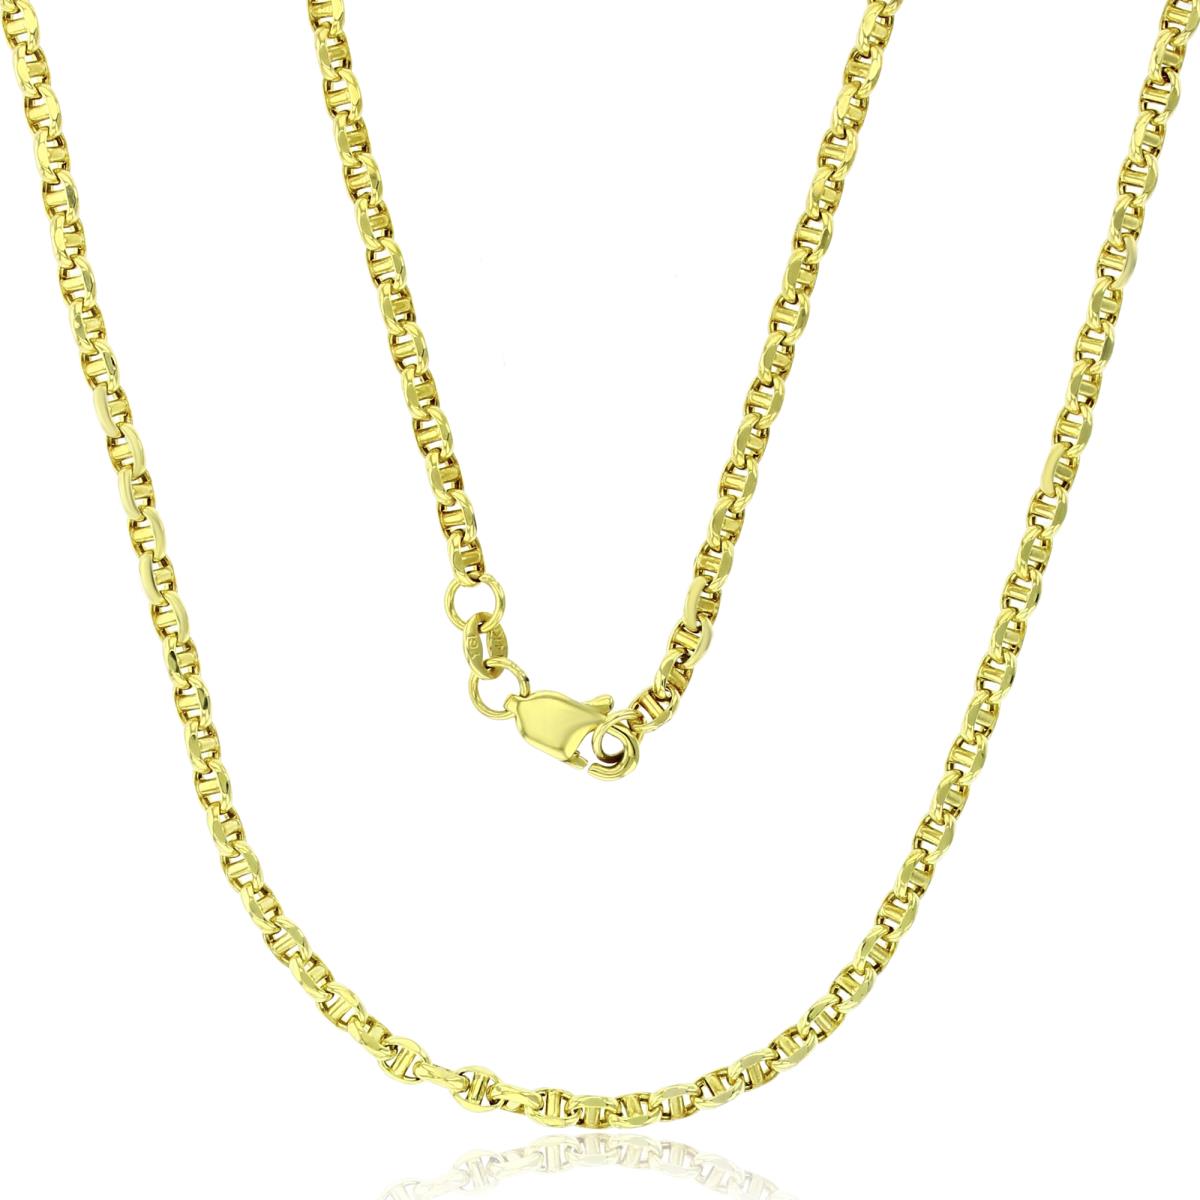 10K Yellow Gold Polished 3.00mm 20" Hollow Filk Chain